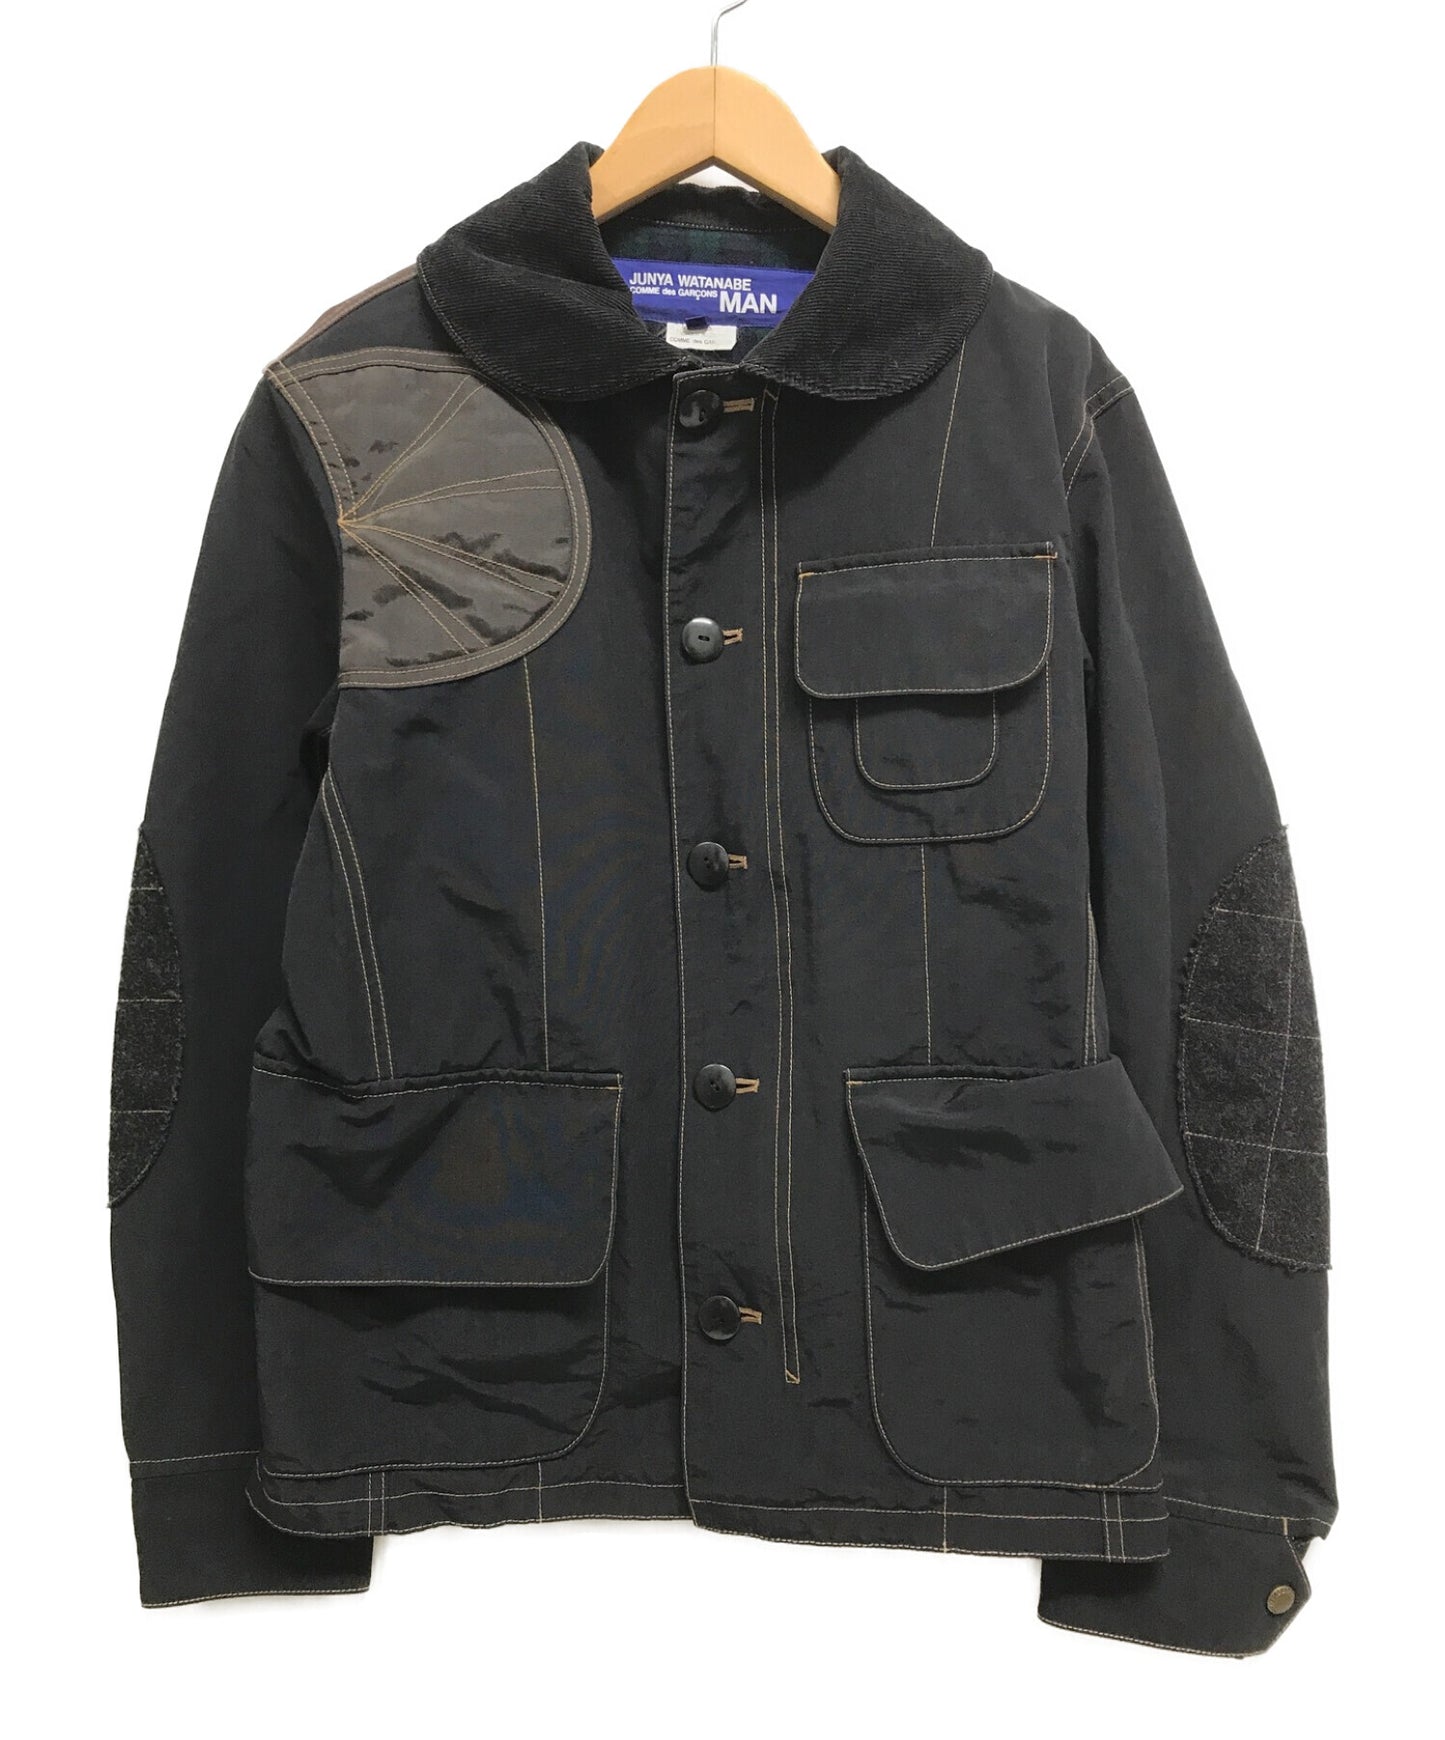 COMME DES GARCONS JUNYA WATANABE MAN COVERALL JACKEL夾克肘補丁WD-J016